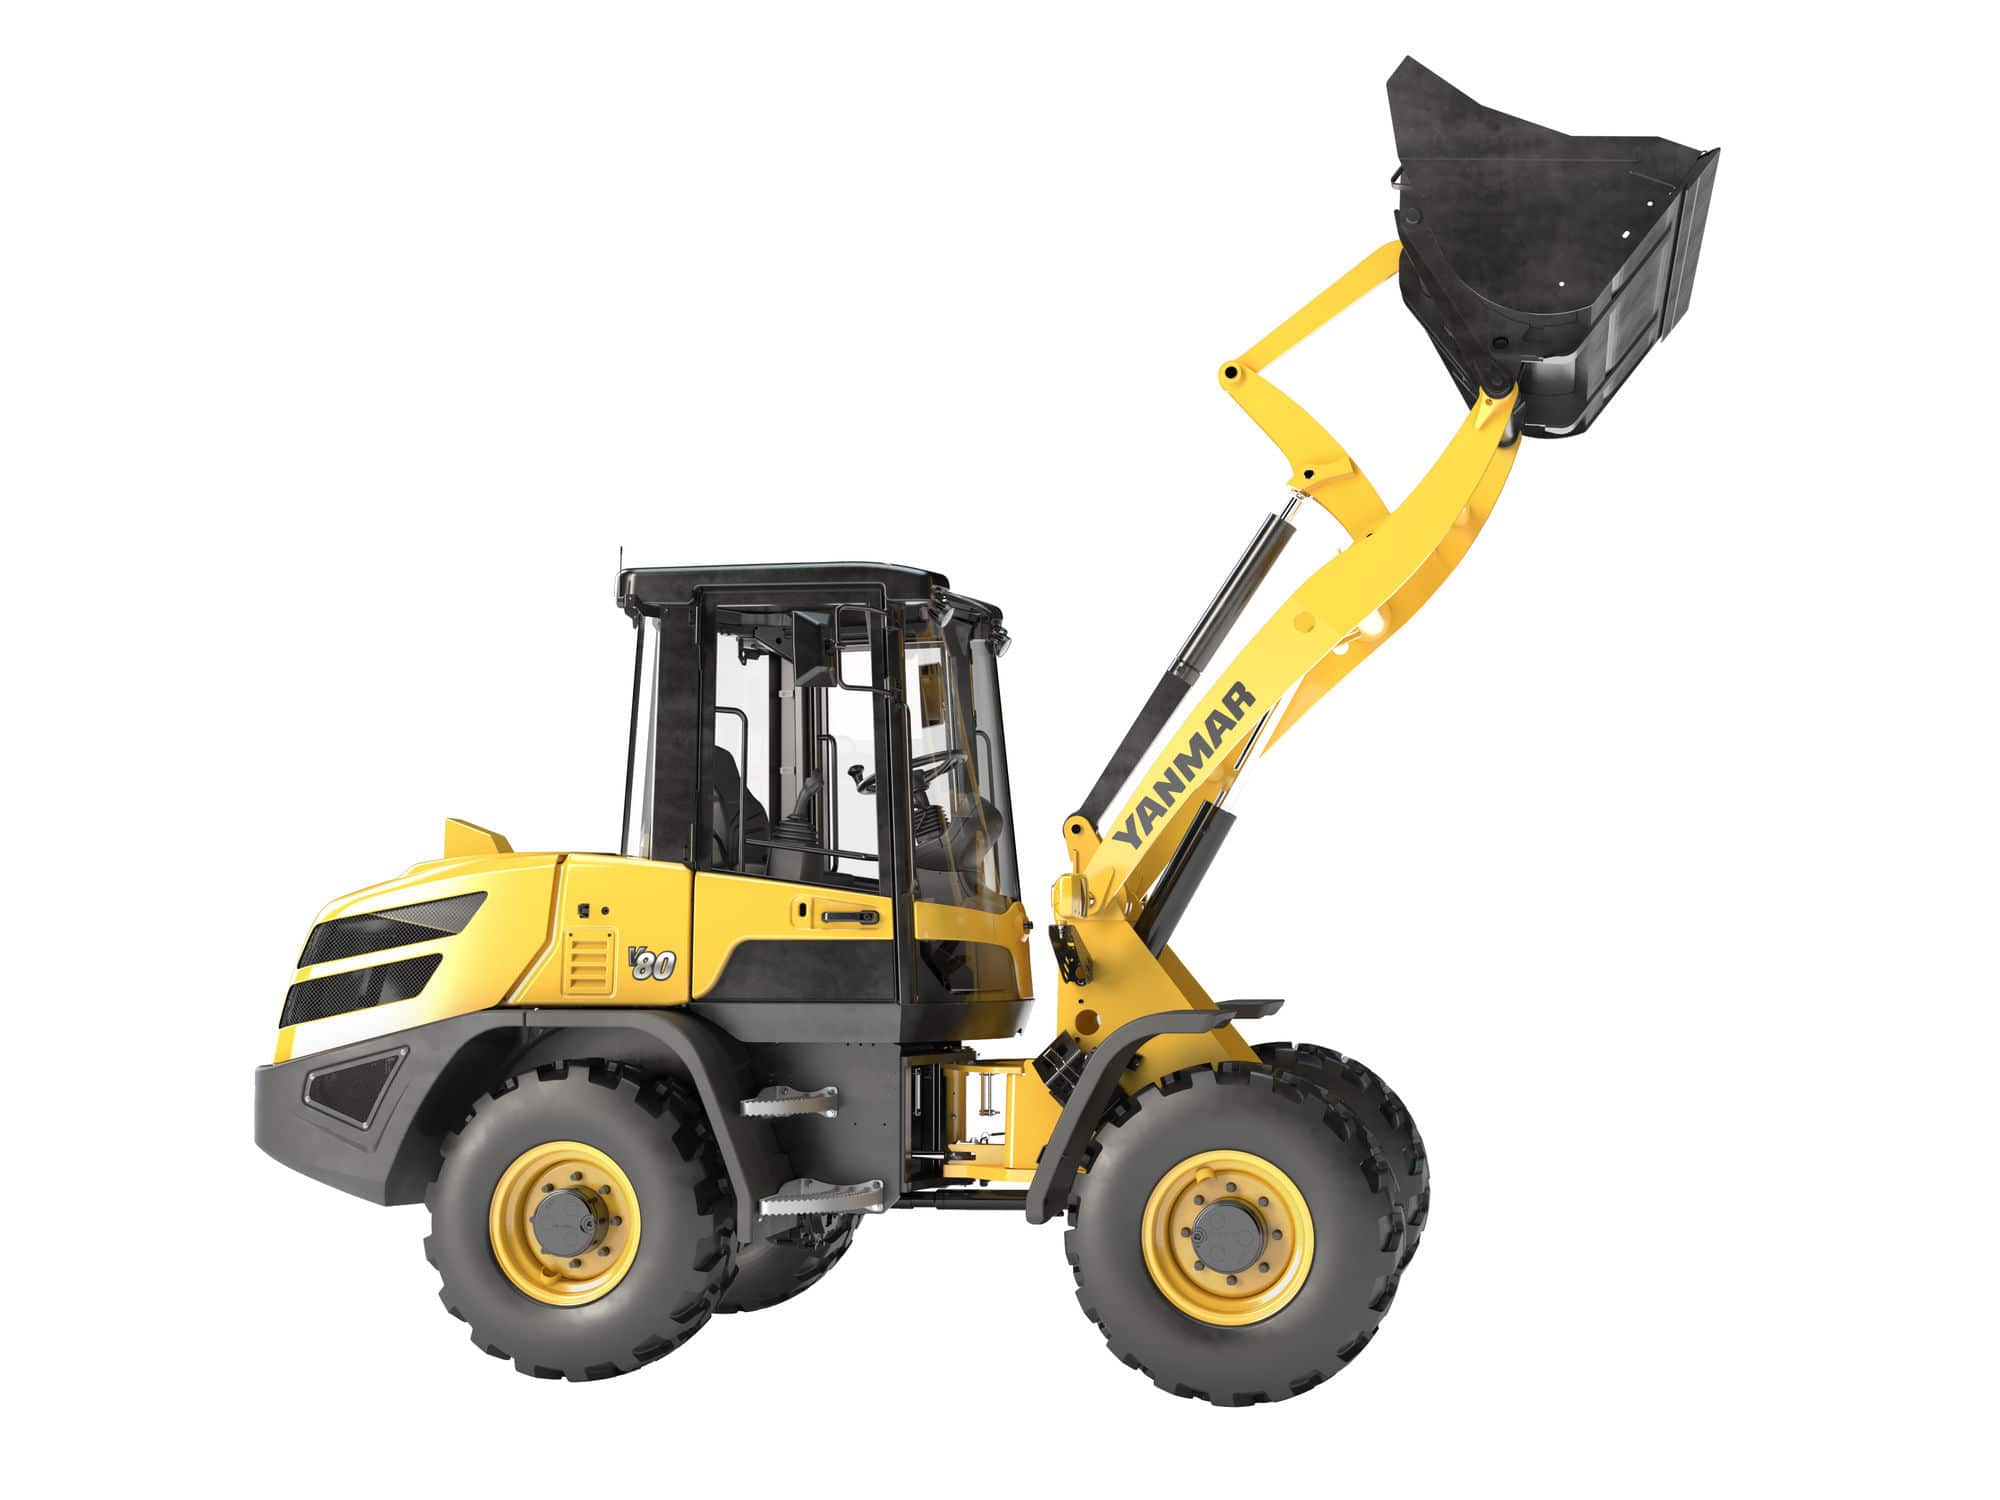 Yanmar V80 compact wheel loader features lower emissions and more power